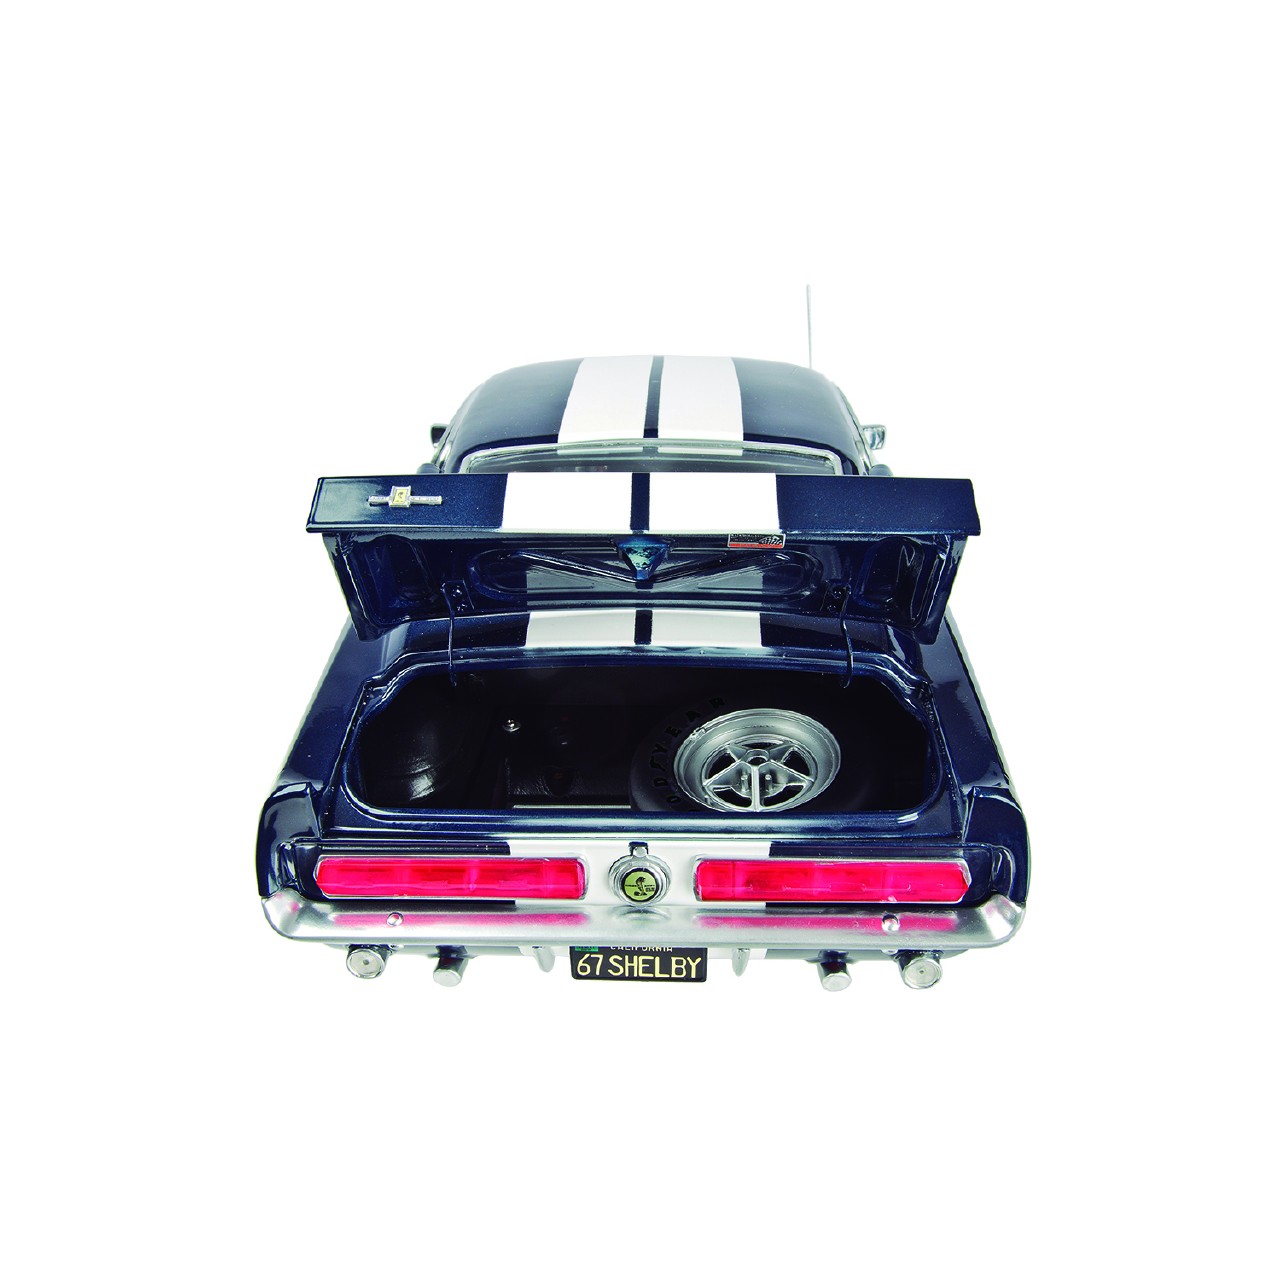 Ford Mustang Shelby GT 500 Model Car Kit | ModelSpace